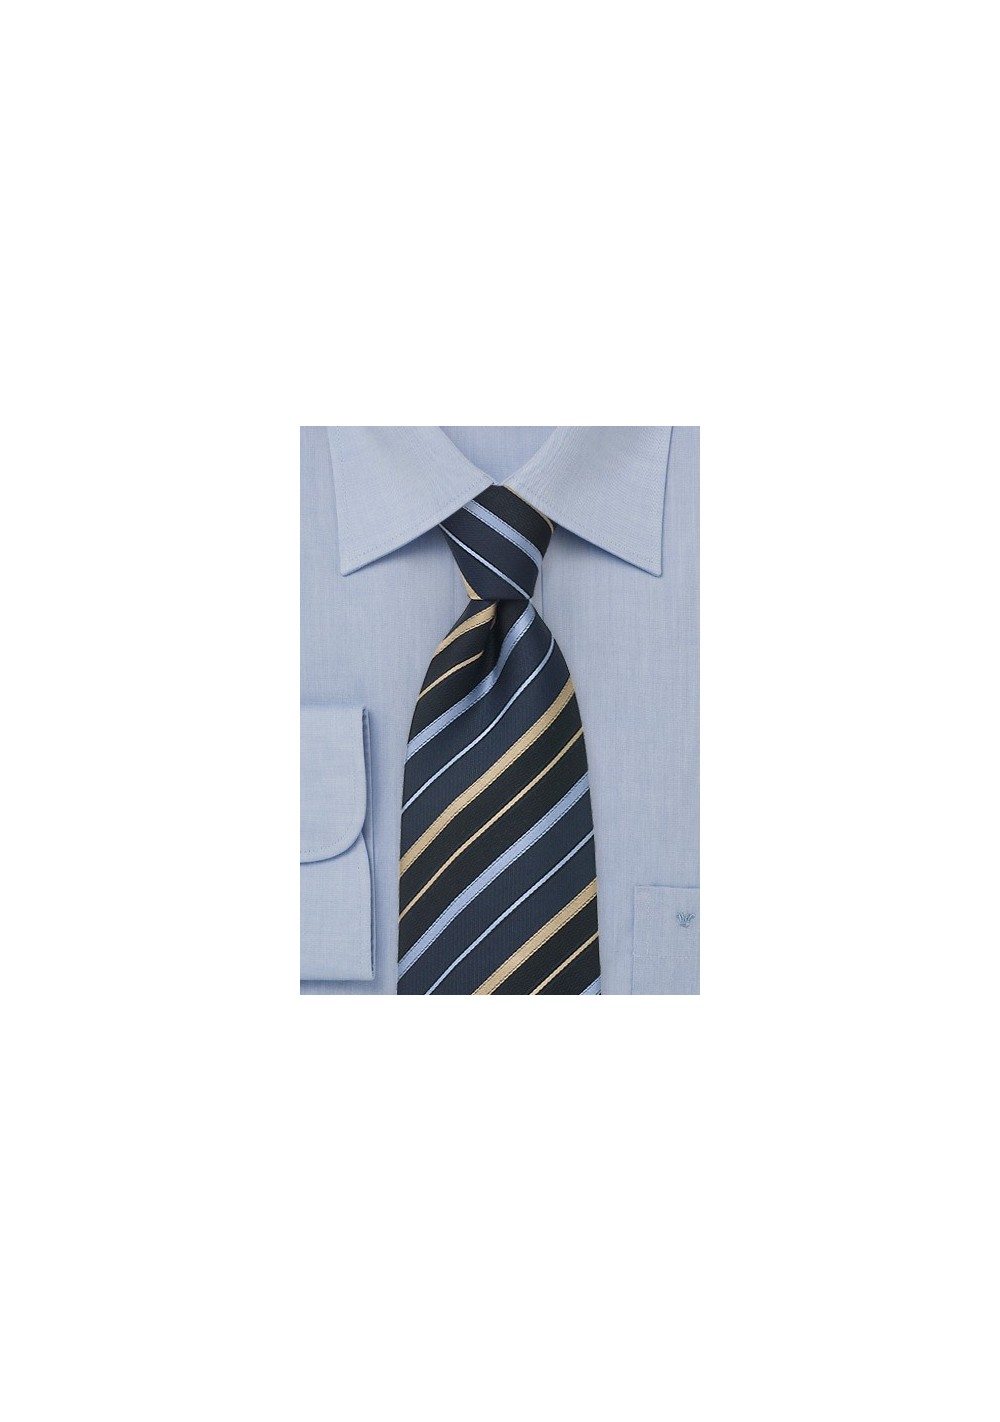 Striped Tie by Chavallieri in Blue, Gold, and Black